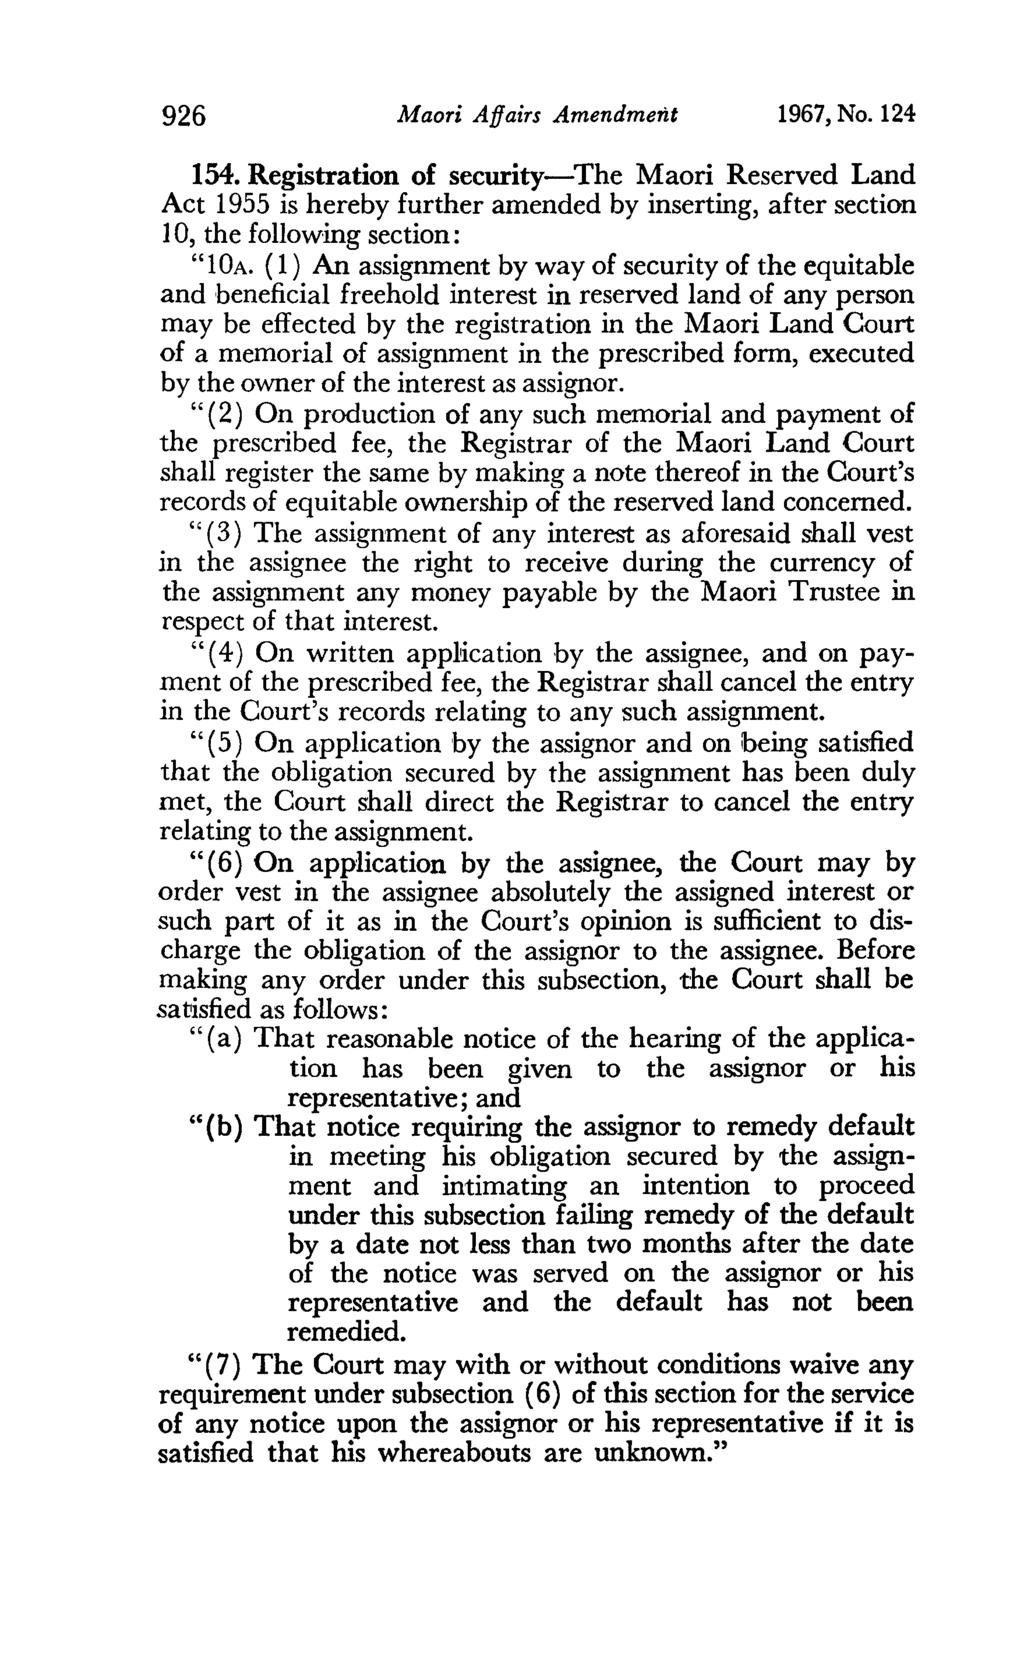 926 Maori Affairs Amendment 1967, No. 124 154. Registration of security-the Maori Reserved Land Act 1955 is hereby further amended by inserting, after section 10, the following section: "10A.